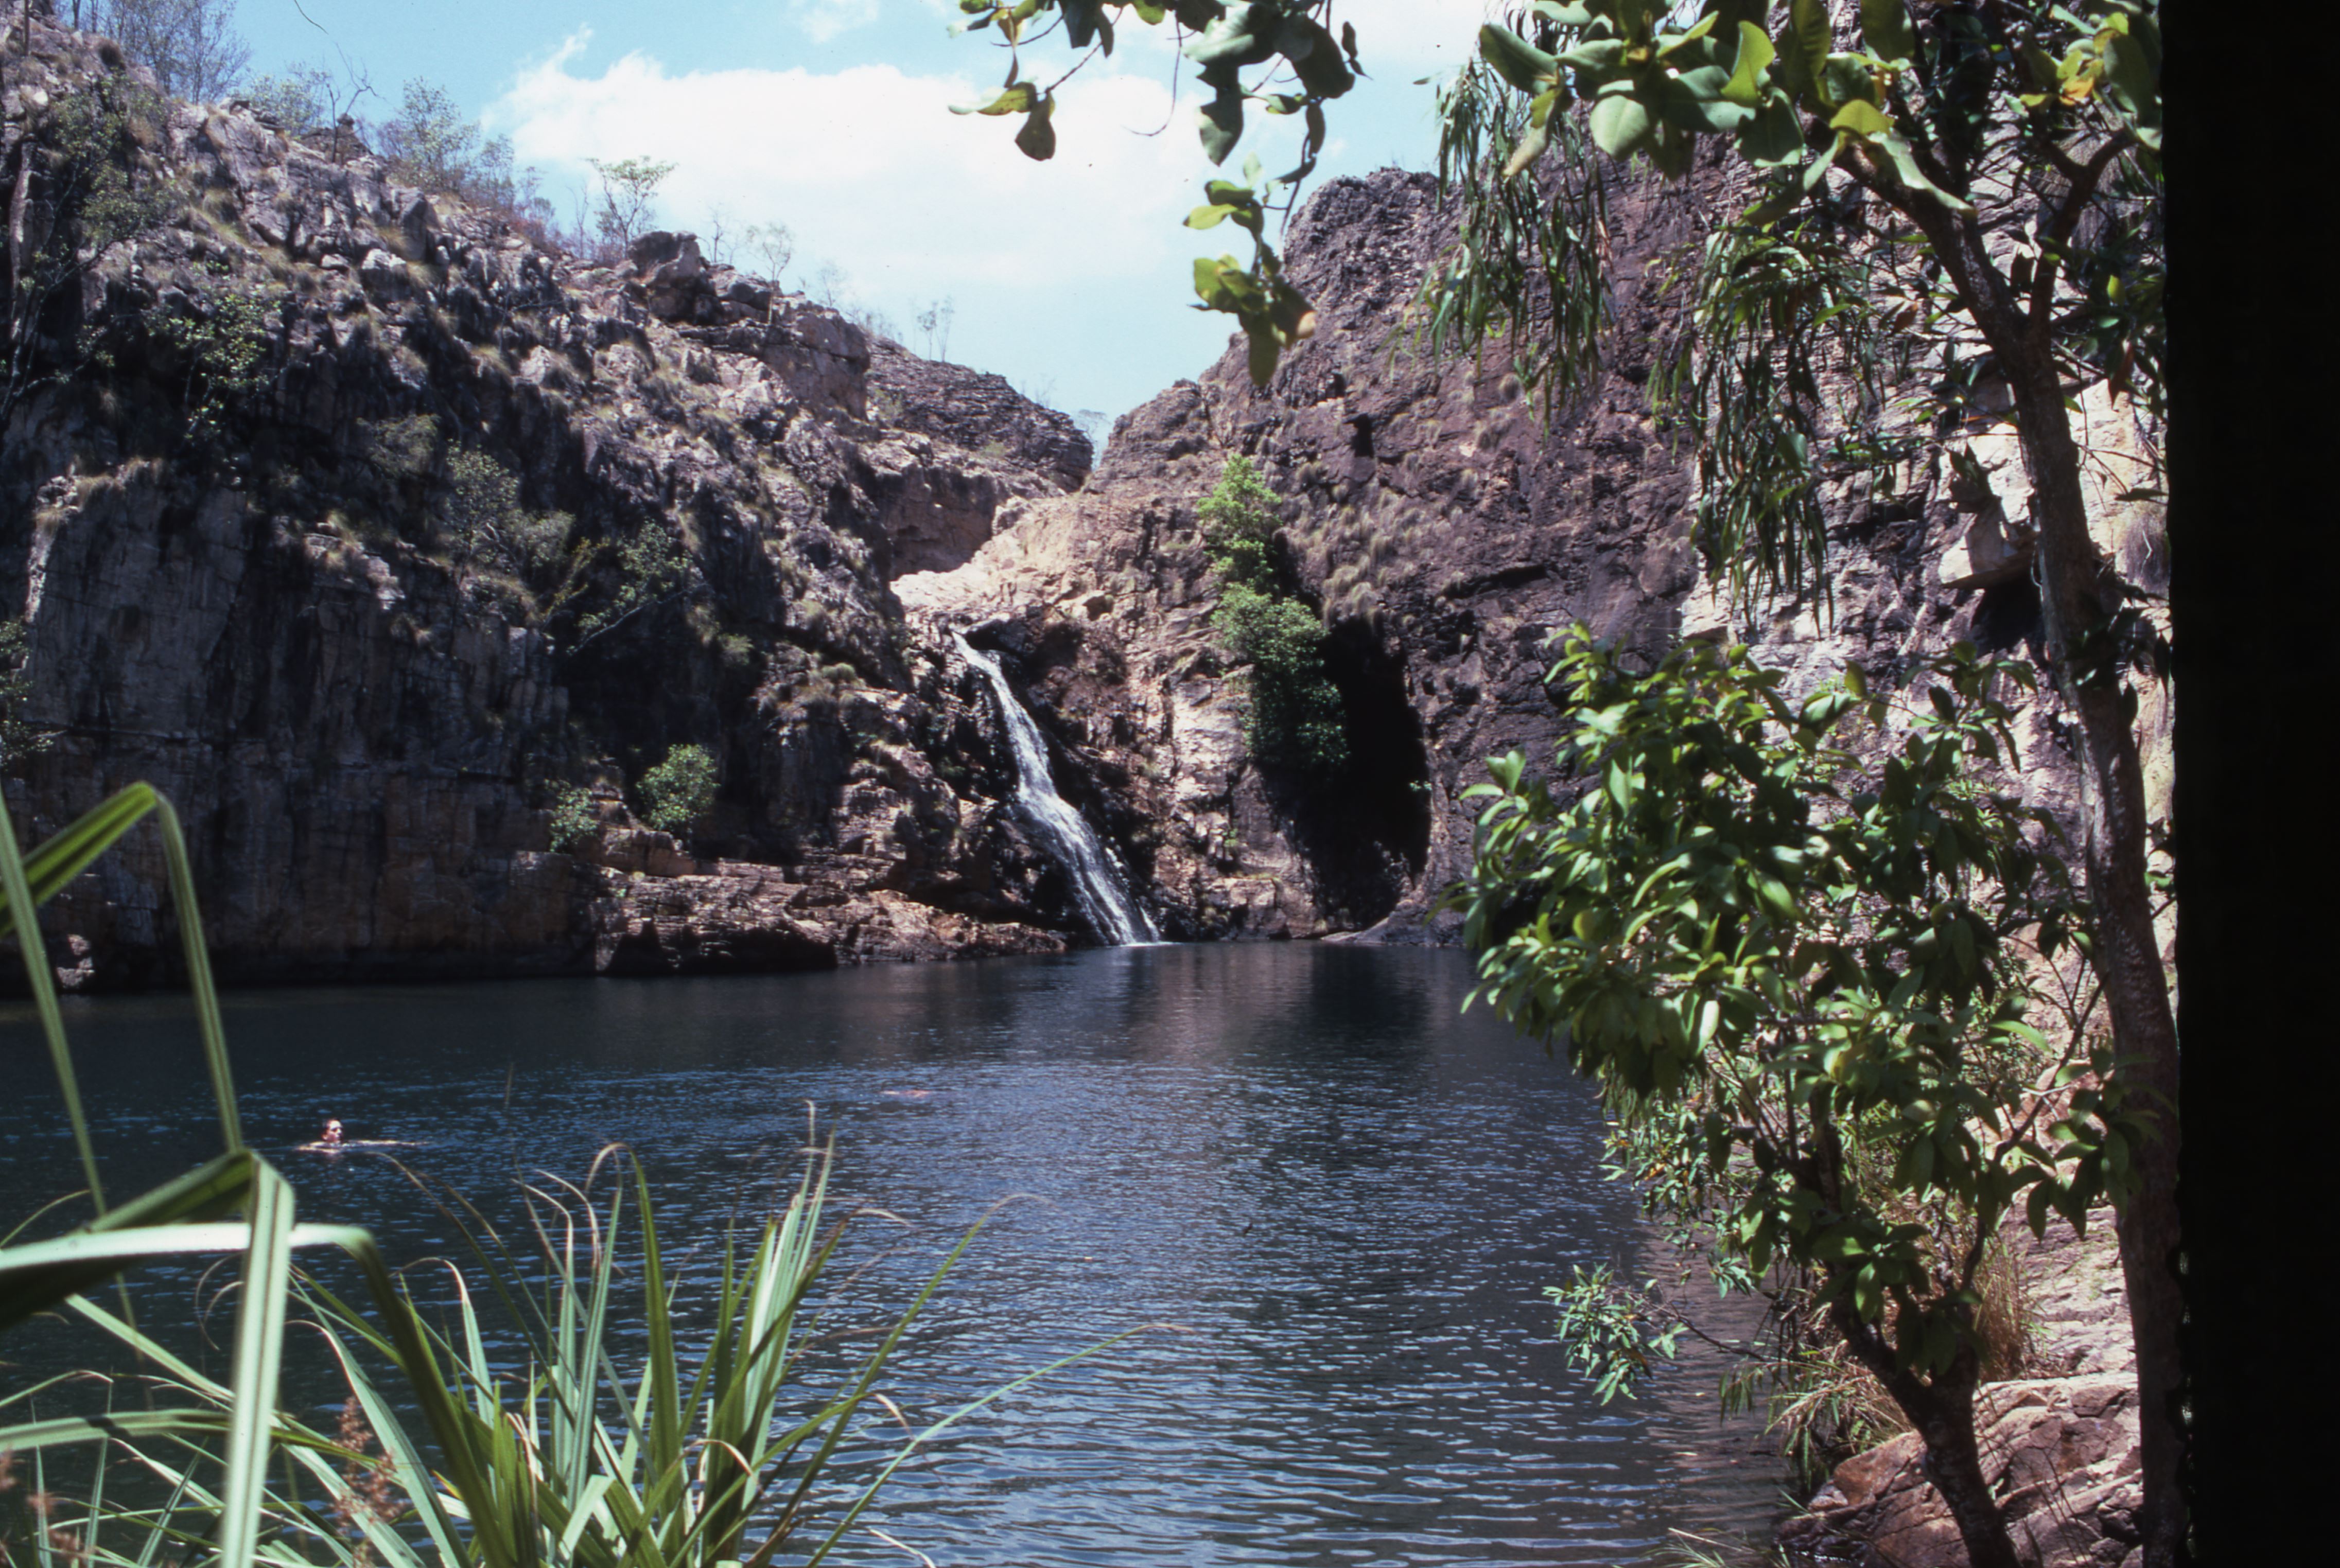 [Maguk (Barramundi Gorge), Kakadu National Park, 23 September 1987]<br />Image courtesy of Northern Territory Archives Service, Department of Chief Minister, NTRS 3822 P2, Box 13 Slide 27.